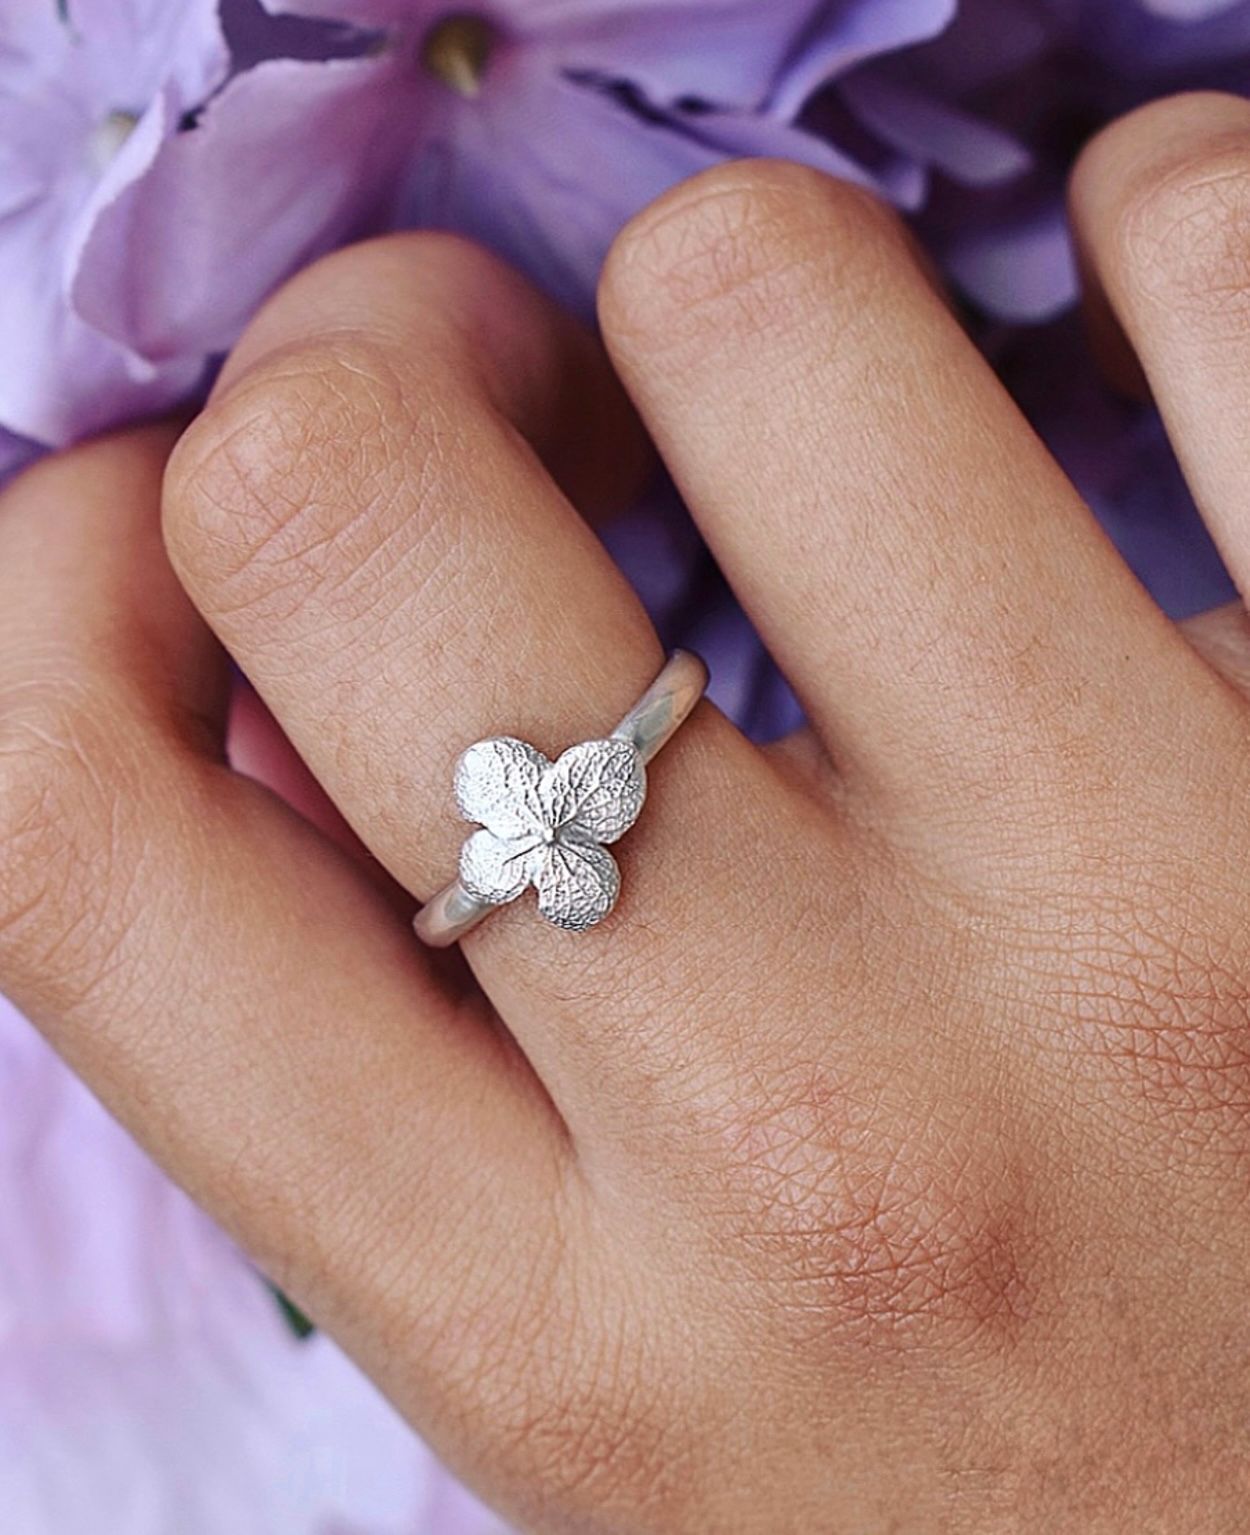 A dainty silver ring with a cast hydrangea flower